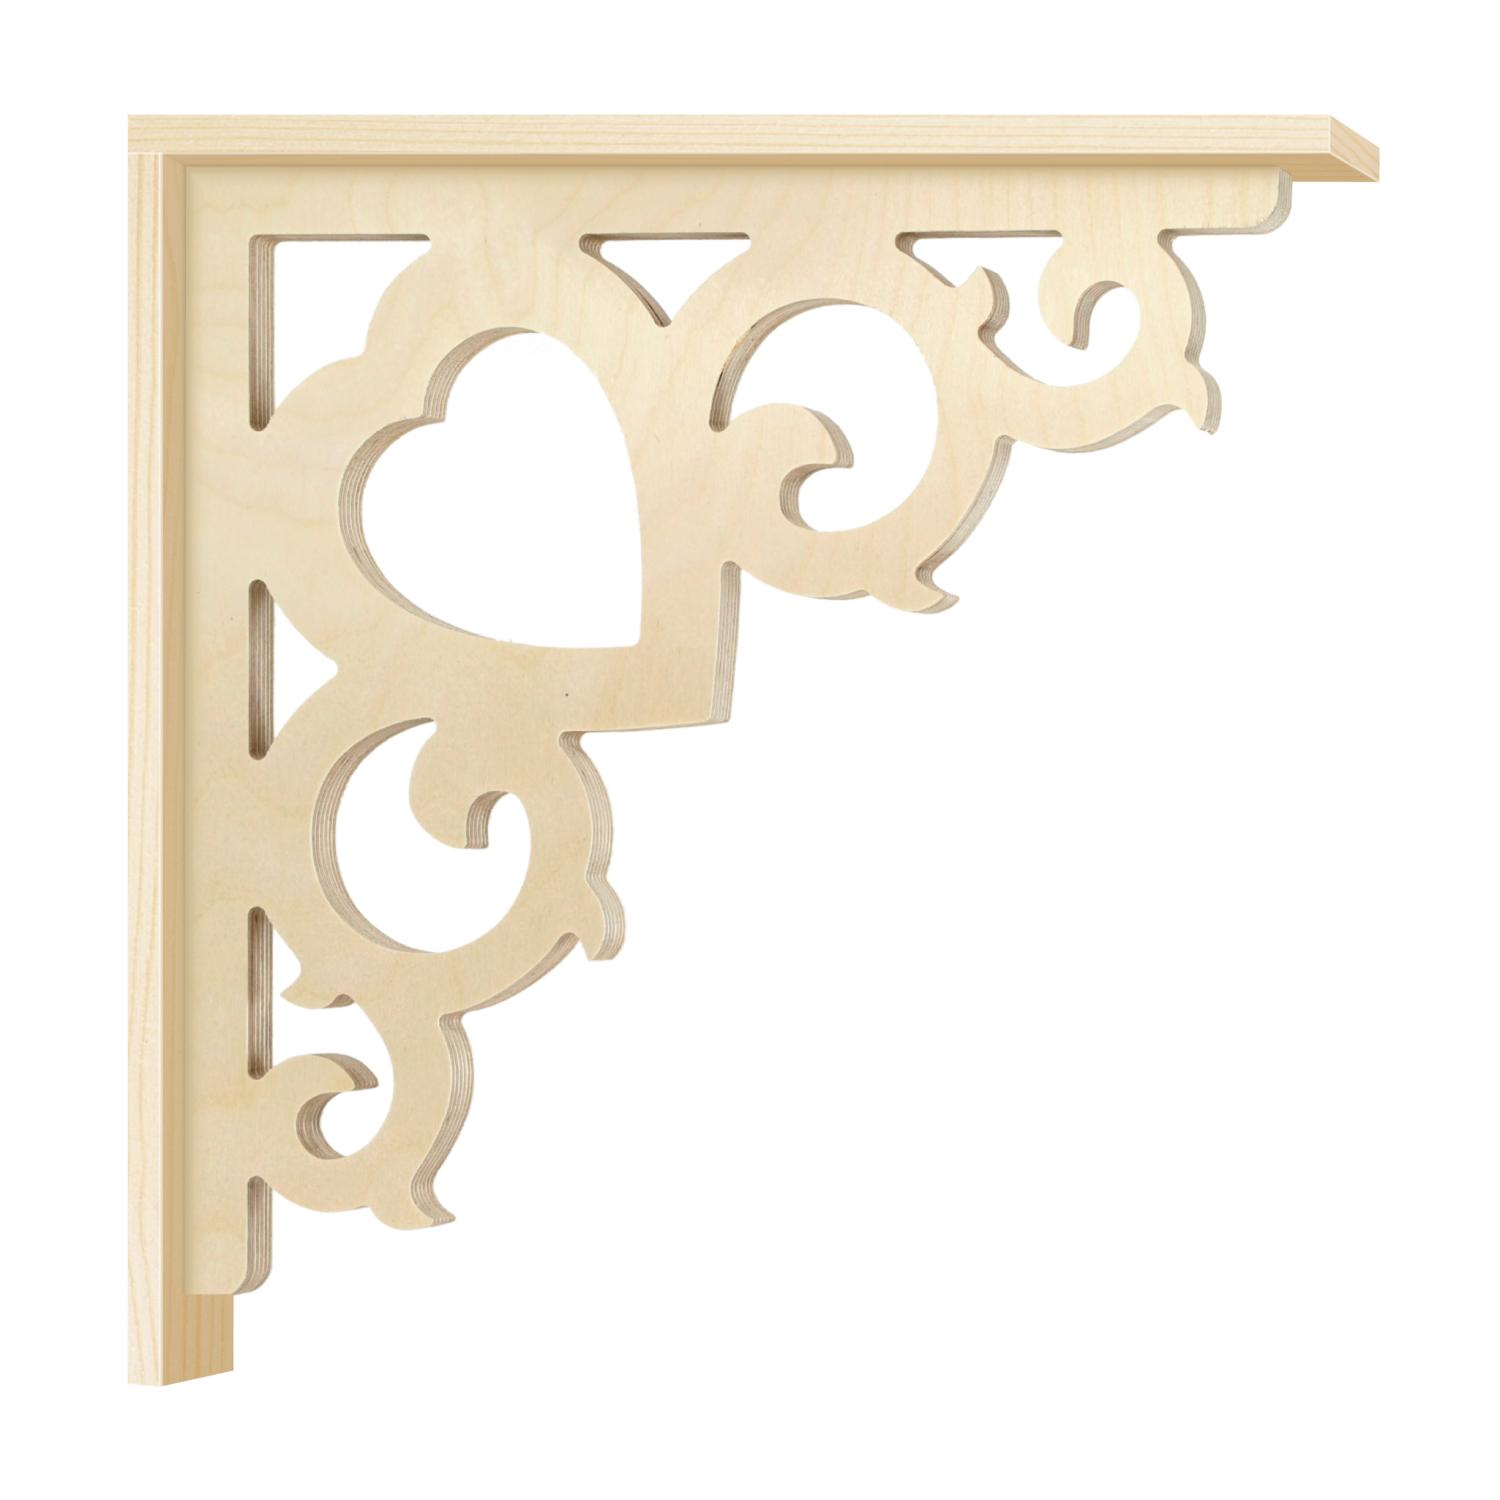 Bracket 002A – Victorian corbel for porch and veranda with decorative wooden strip